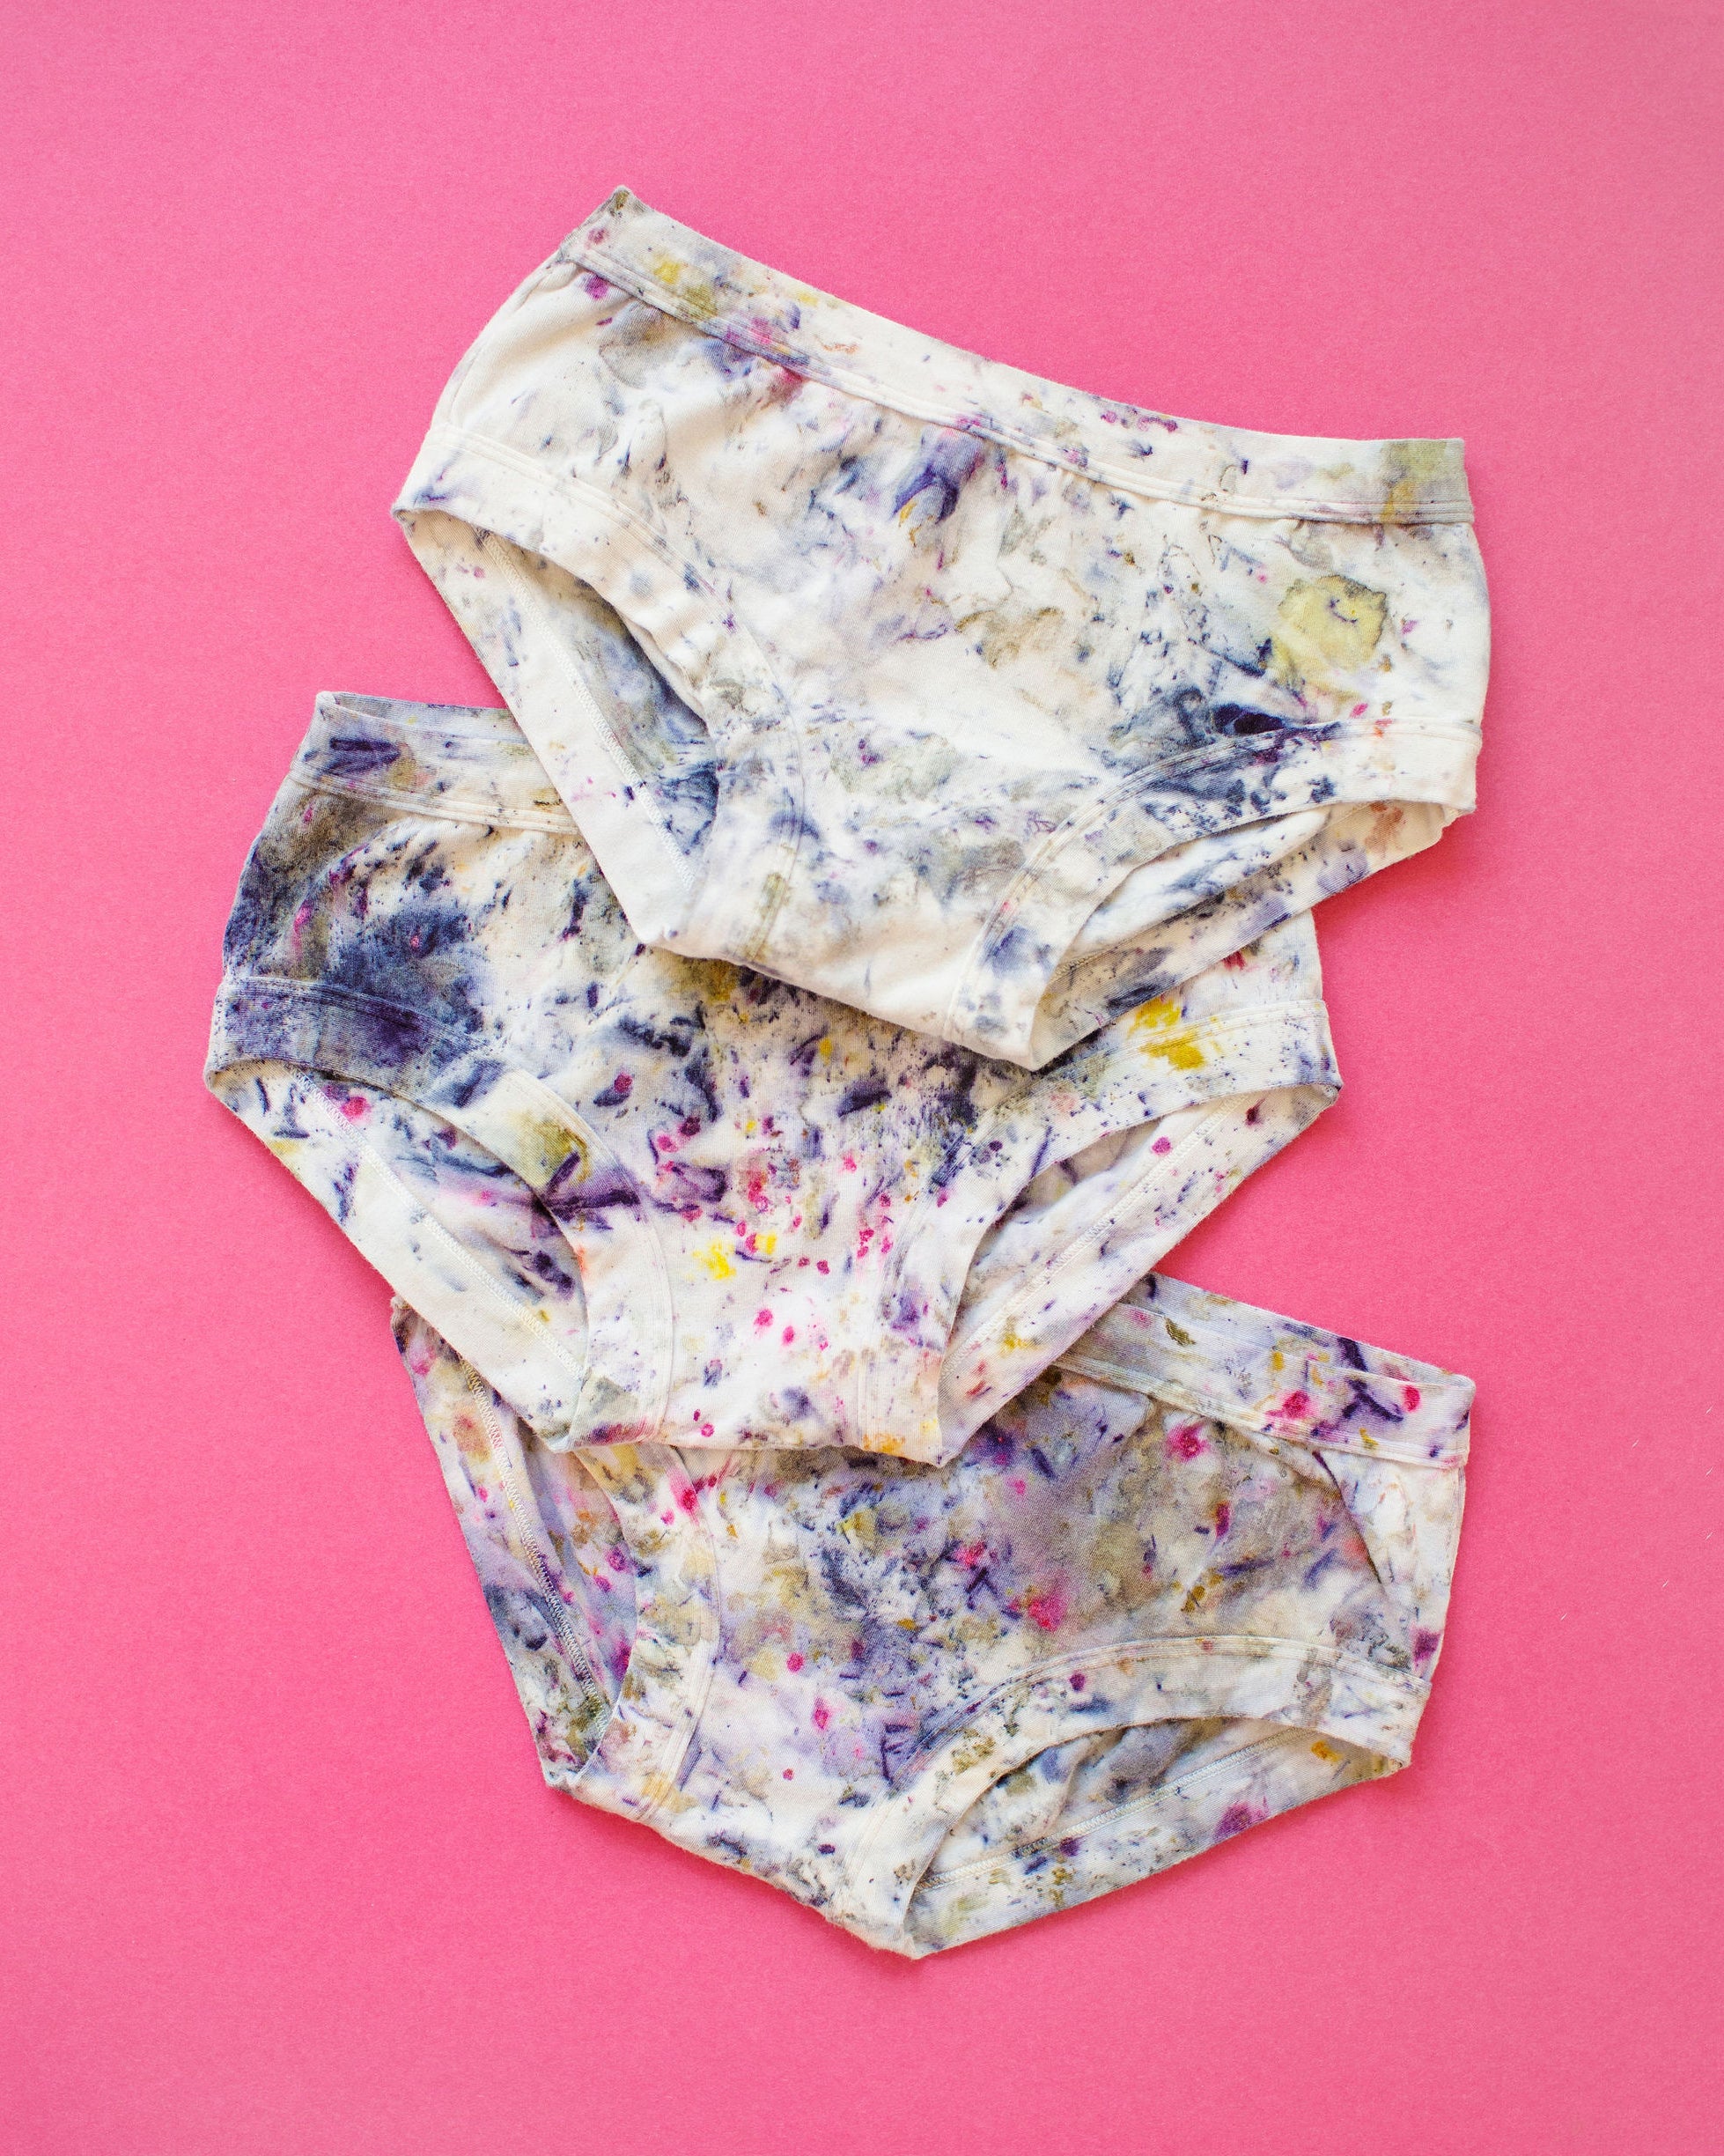 Flat lay of three Thunderpants Hipster style underwear in Cosmic Compost hand dye.